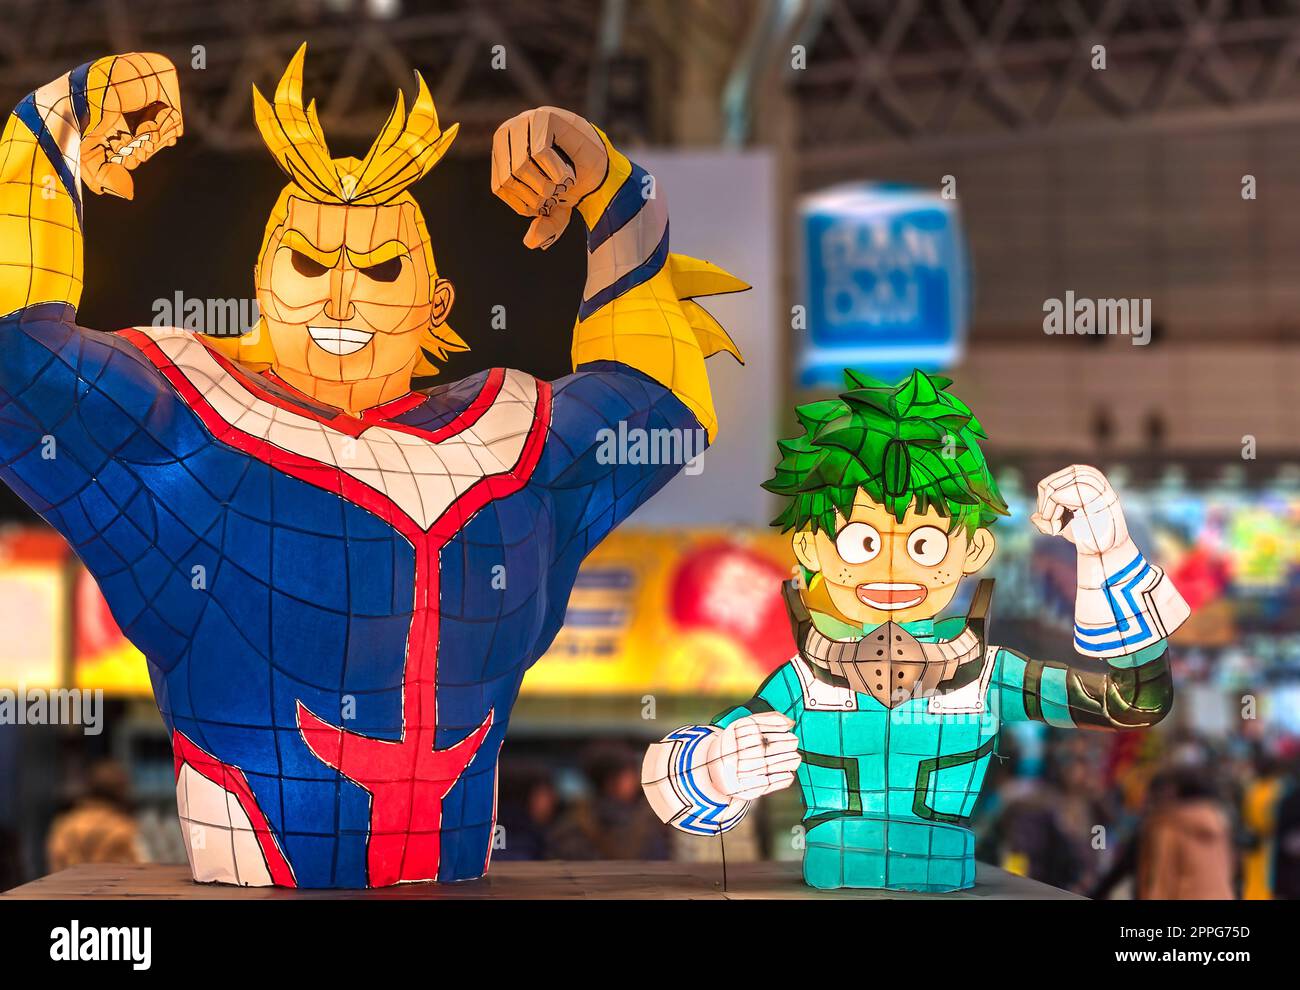 chiba, japan - december 22 2018: Illuminated Nebuta lanterns handmade of painted washi paper and wire frame depicting manga and anime characters of My Hero Academia during the convention Jump Festa 19 Stock Photo